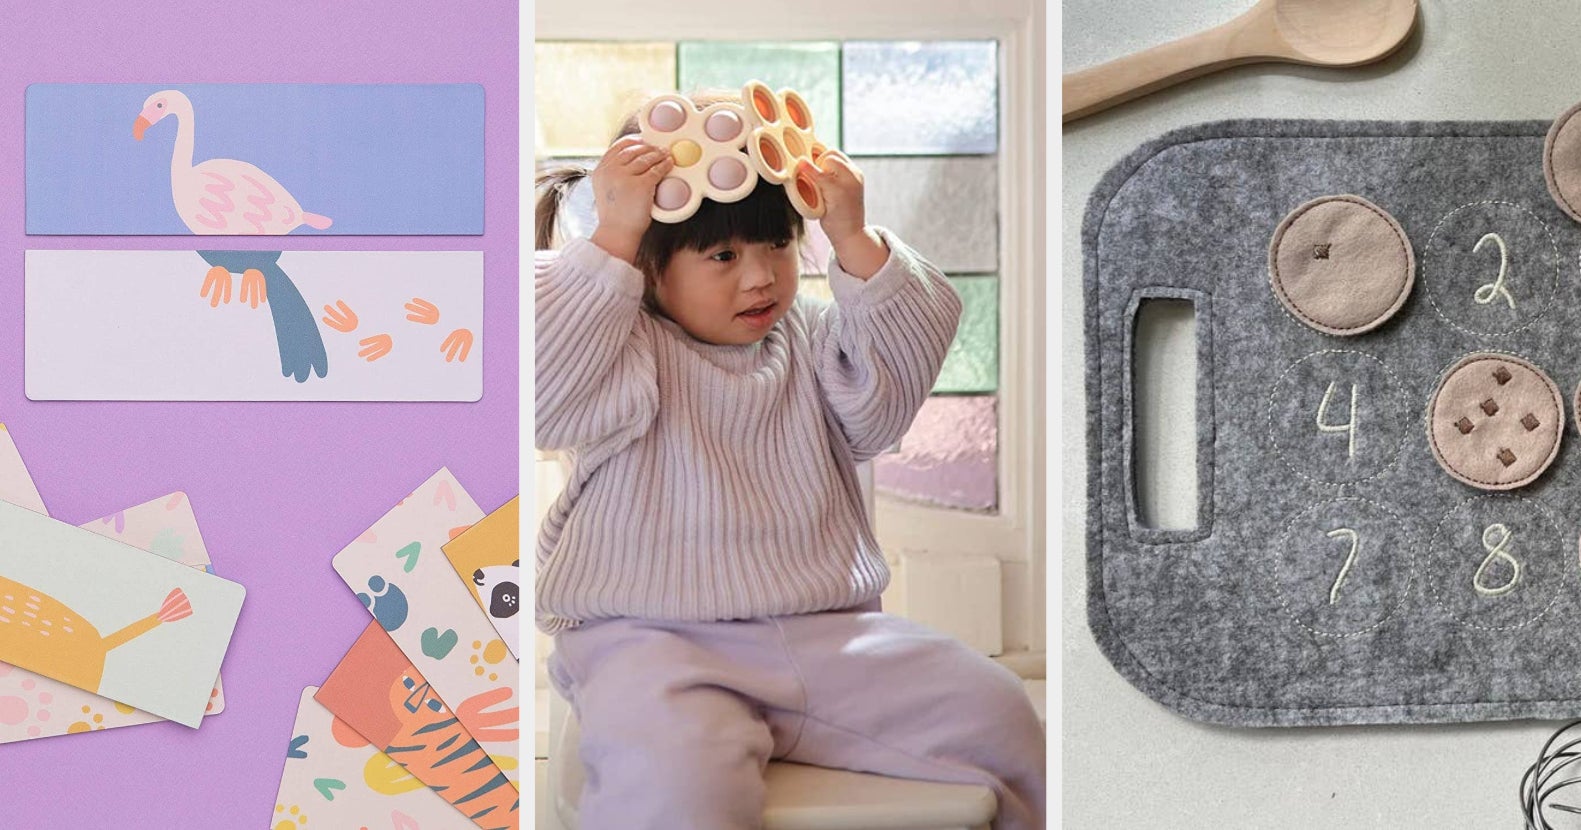 35 Entertaining Toys Under $25 So You Can Have Nap Time